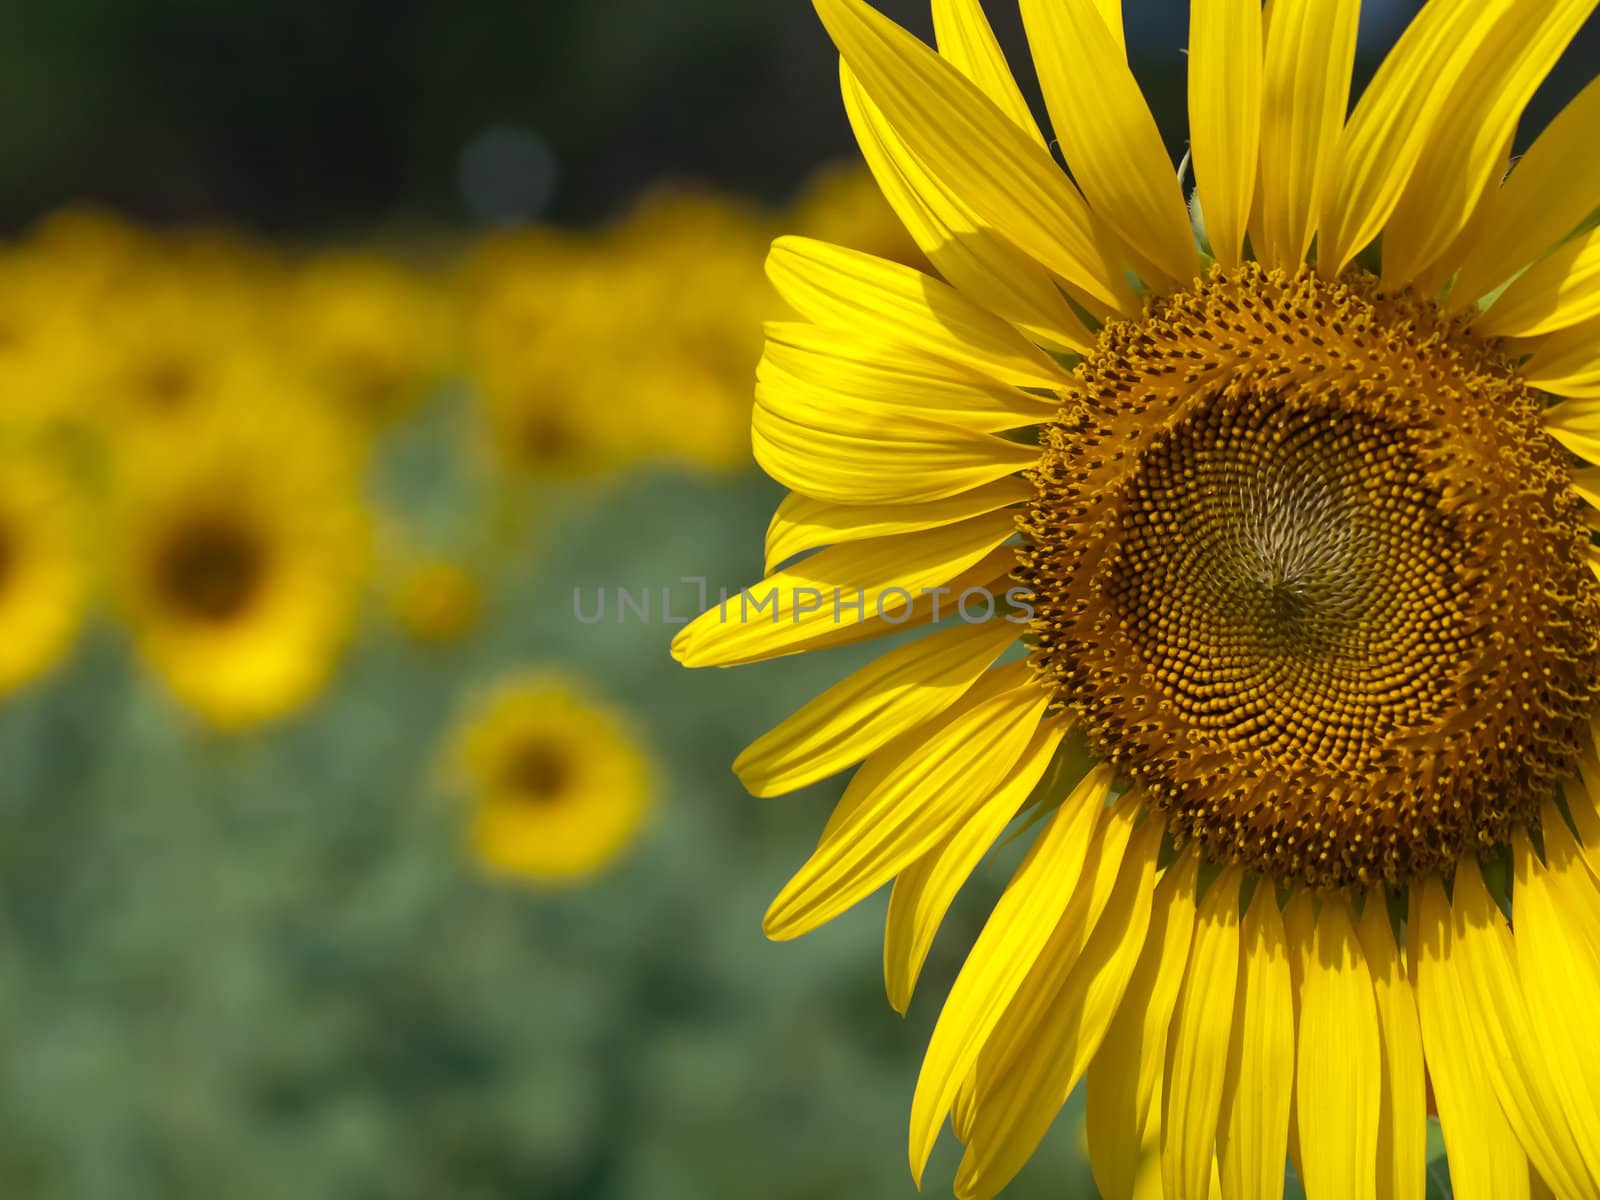 Closeup of sunflower with abstract out of focus background